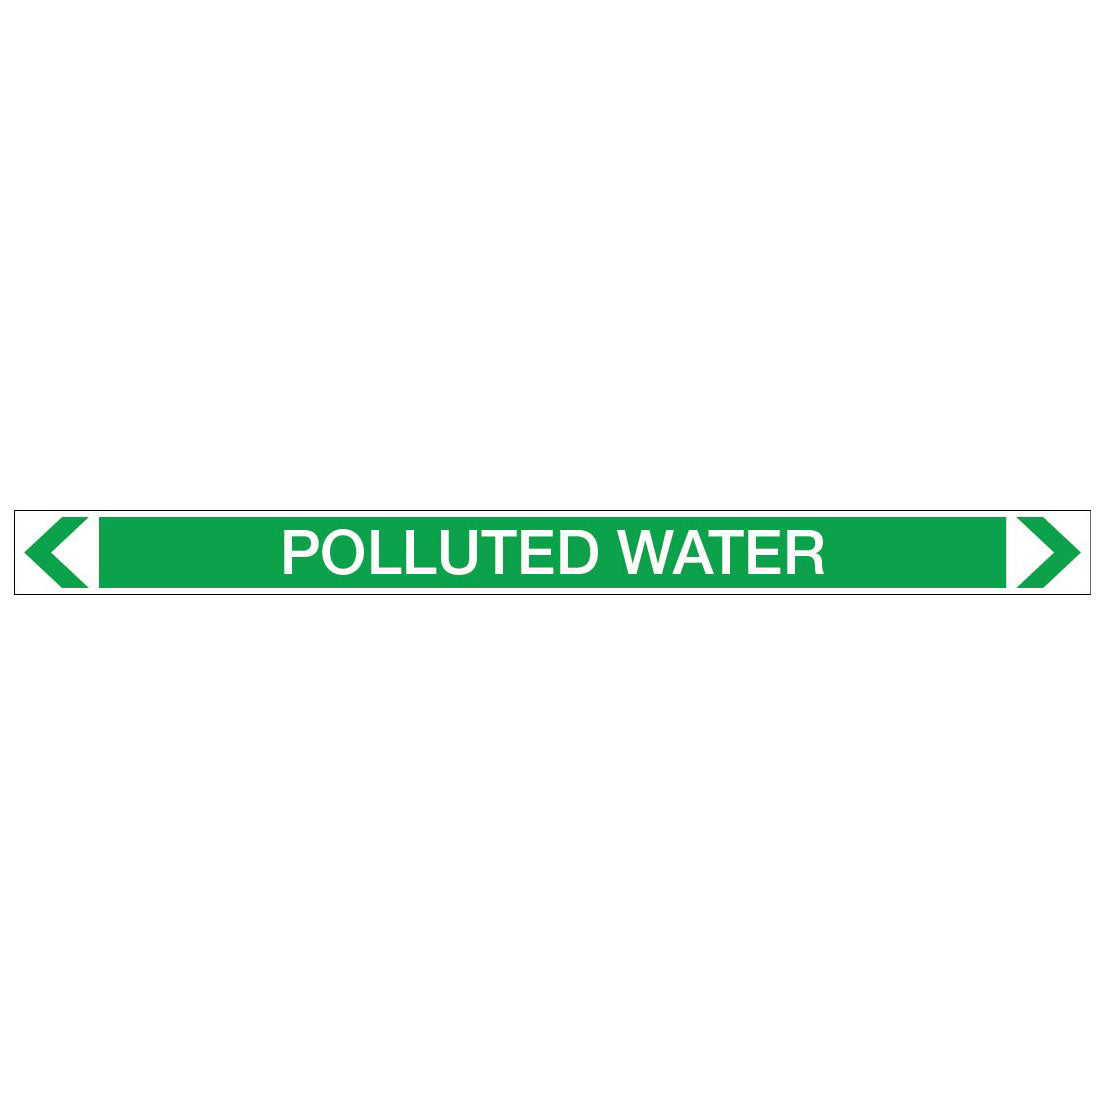 Water - Polluted Water - Pipe Marker Sticker